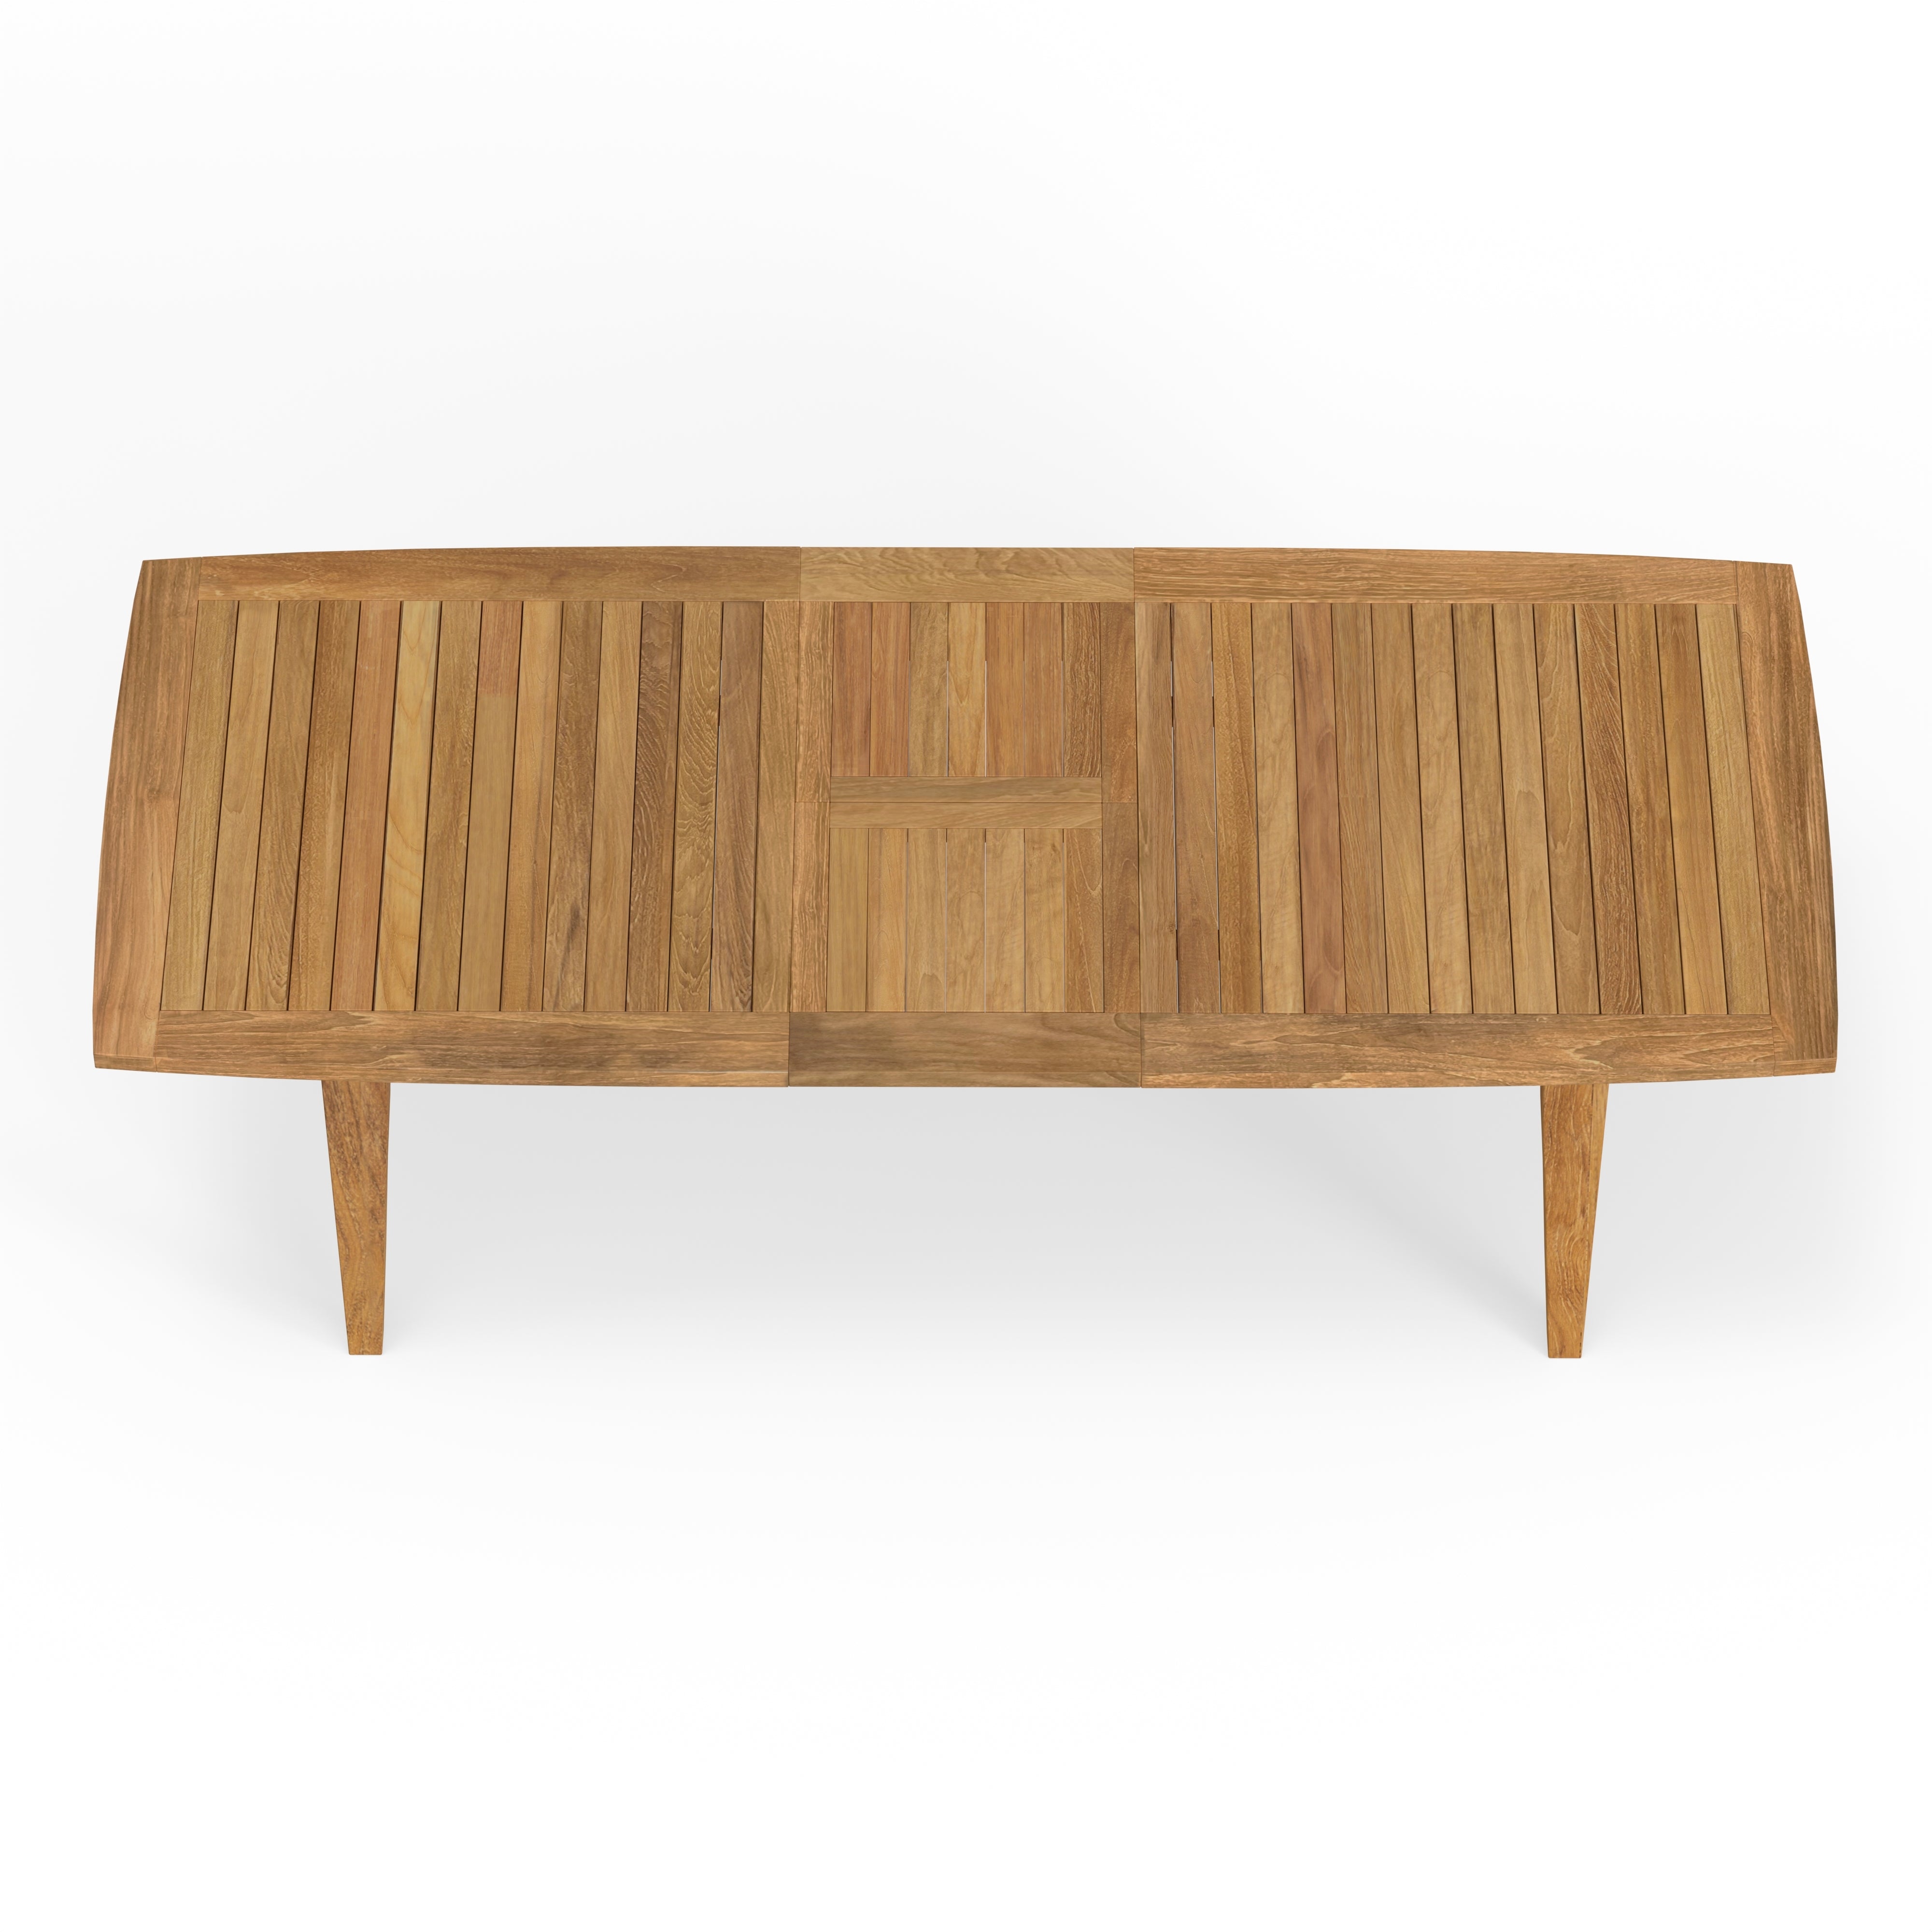 Hidden Leaf Great Quality Outdoor Teak Dining Extension Table